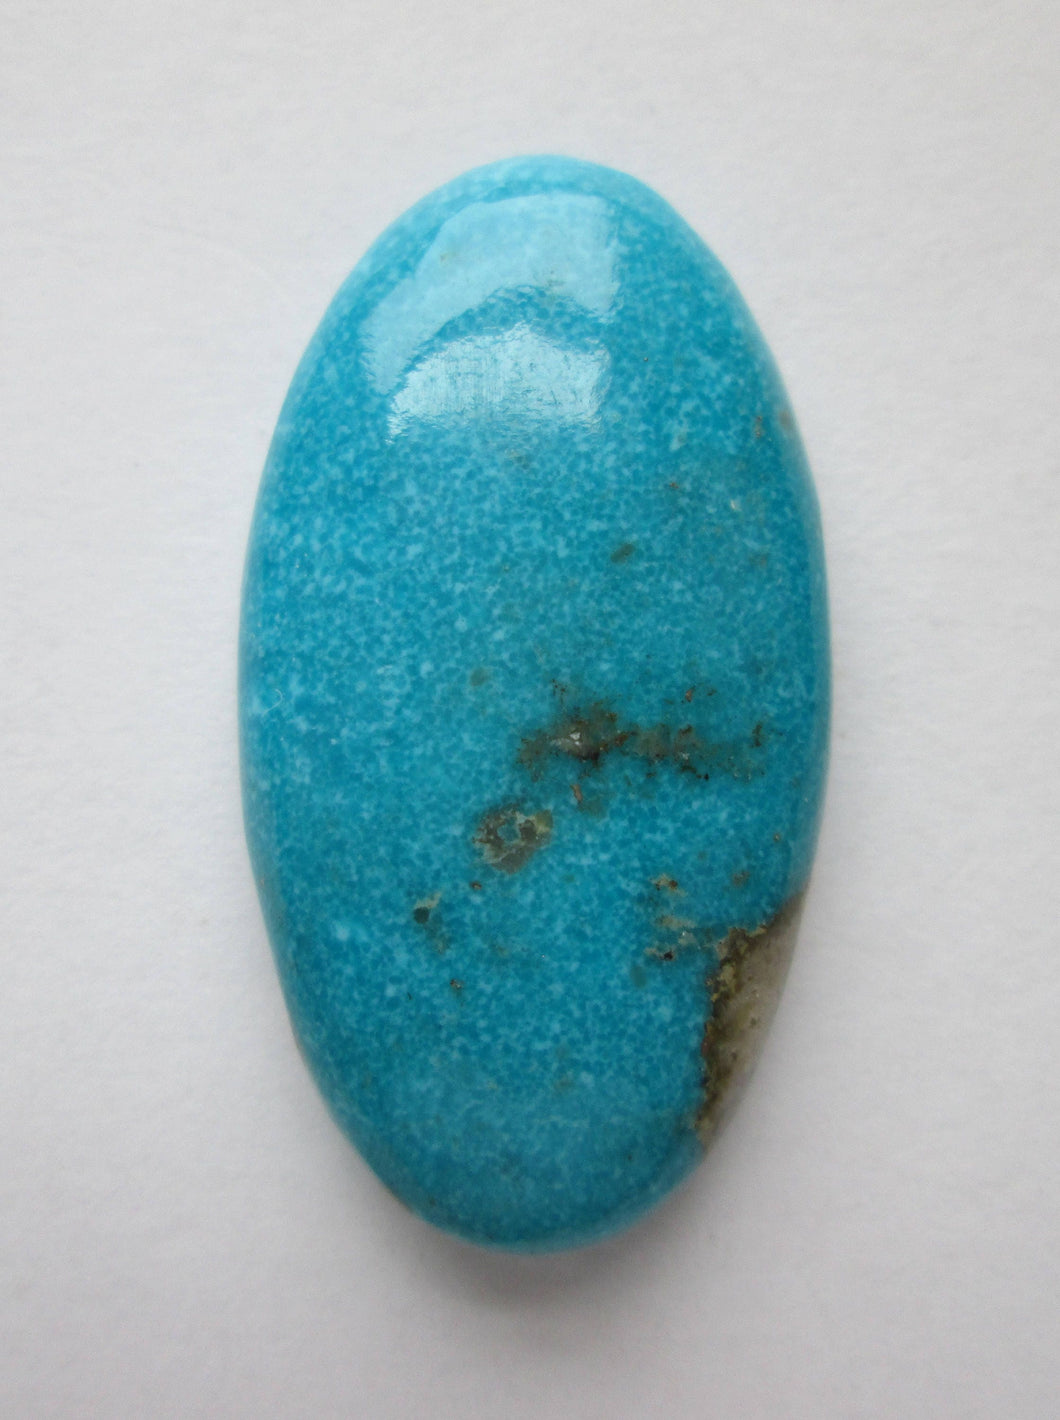 48.00 ct. (37x19x8 mm) Stabilized Morenci Turquoise Cabochon Gemstone, # 1AO 048